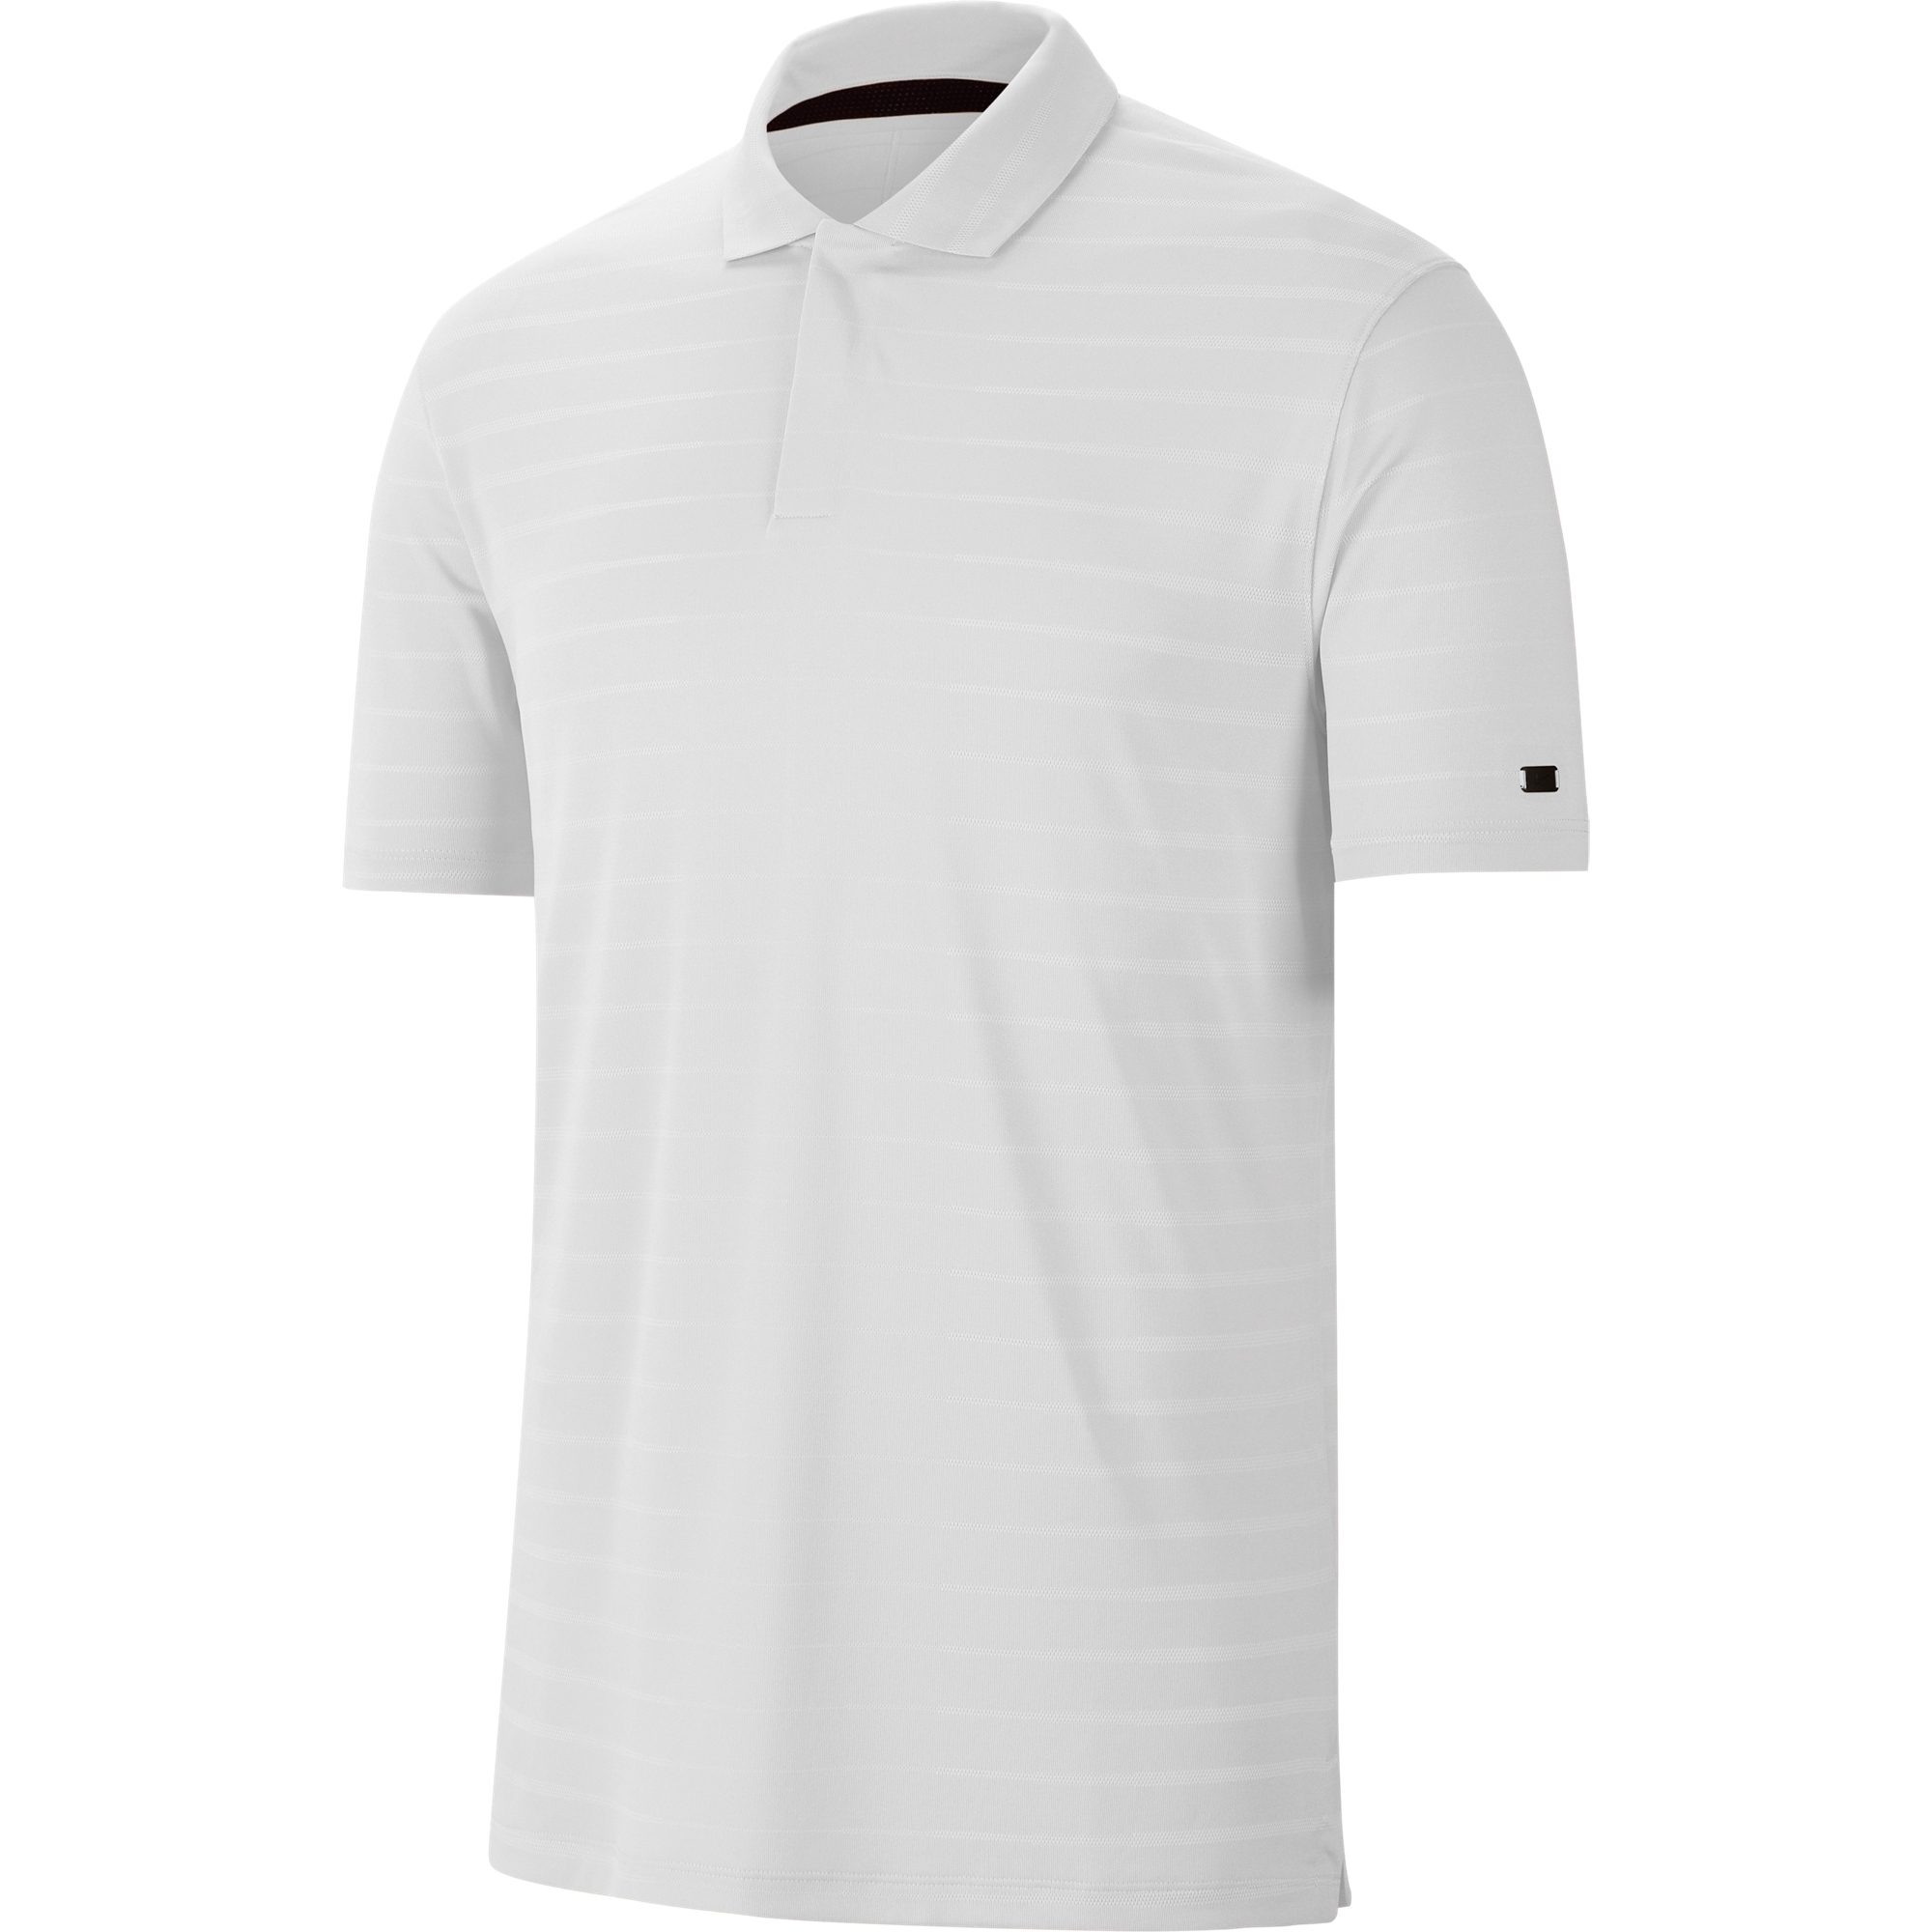 Nike Mens Dry Fit Sweat Wicking Golf Polo Shirt S- Chest 35-37.5’